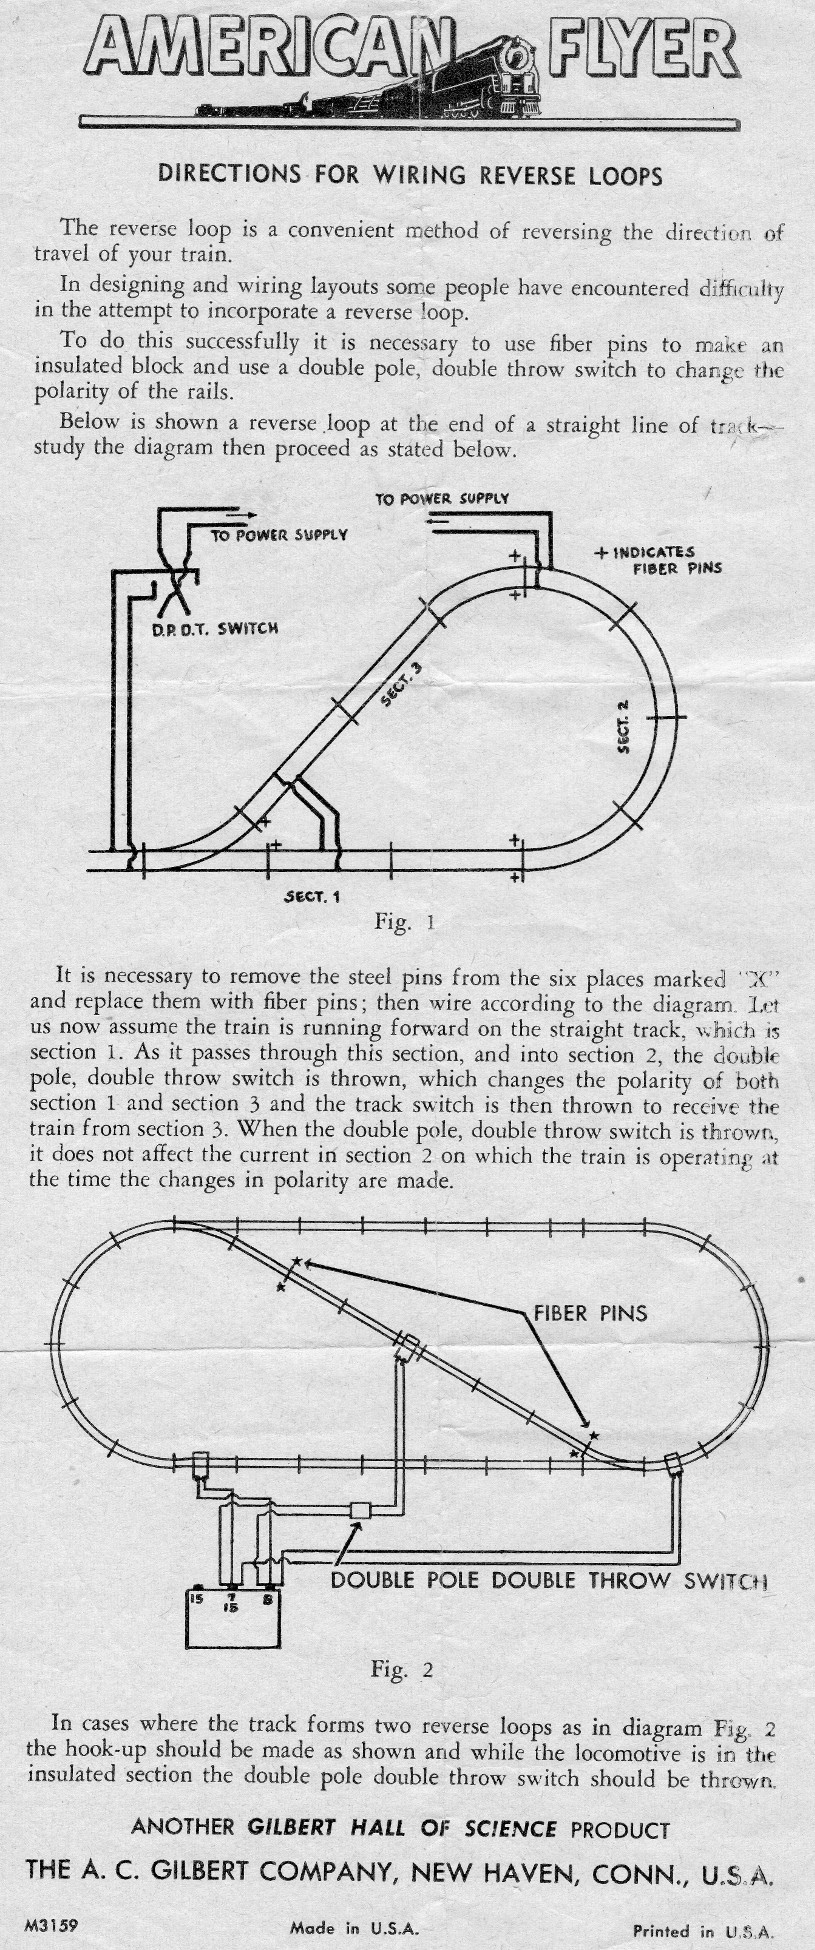 American Flyer Directions for Wiring Reverse Loops